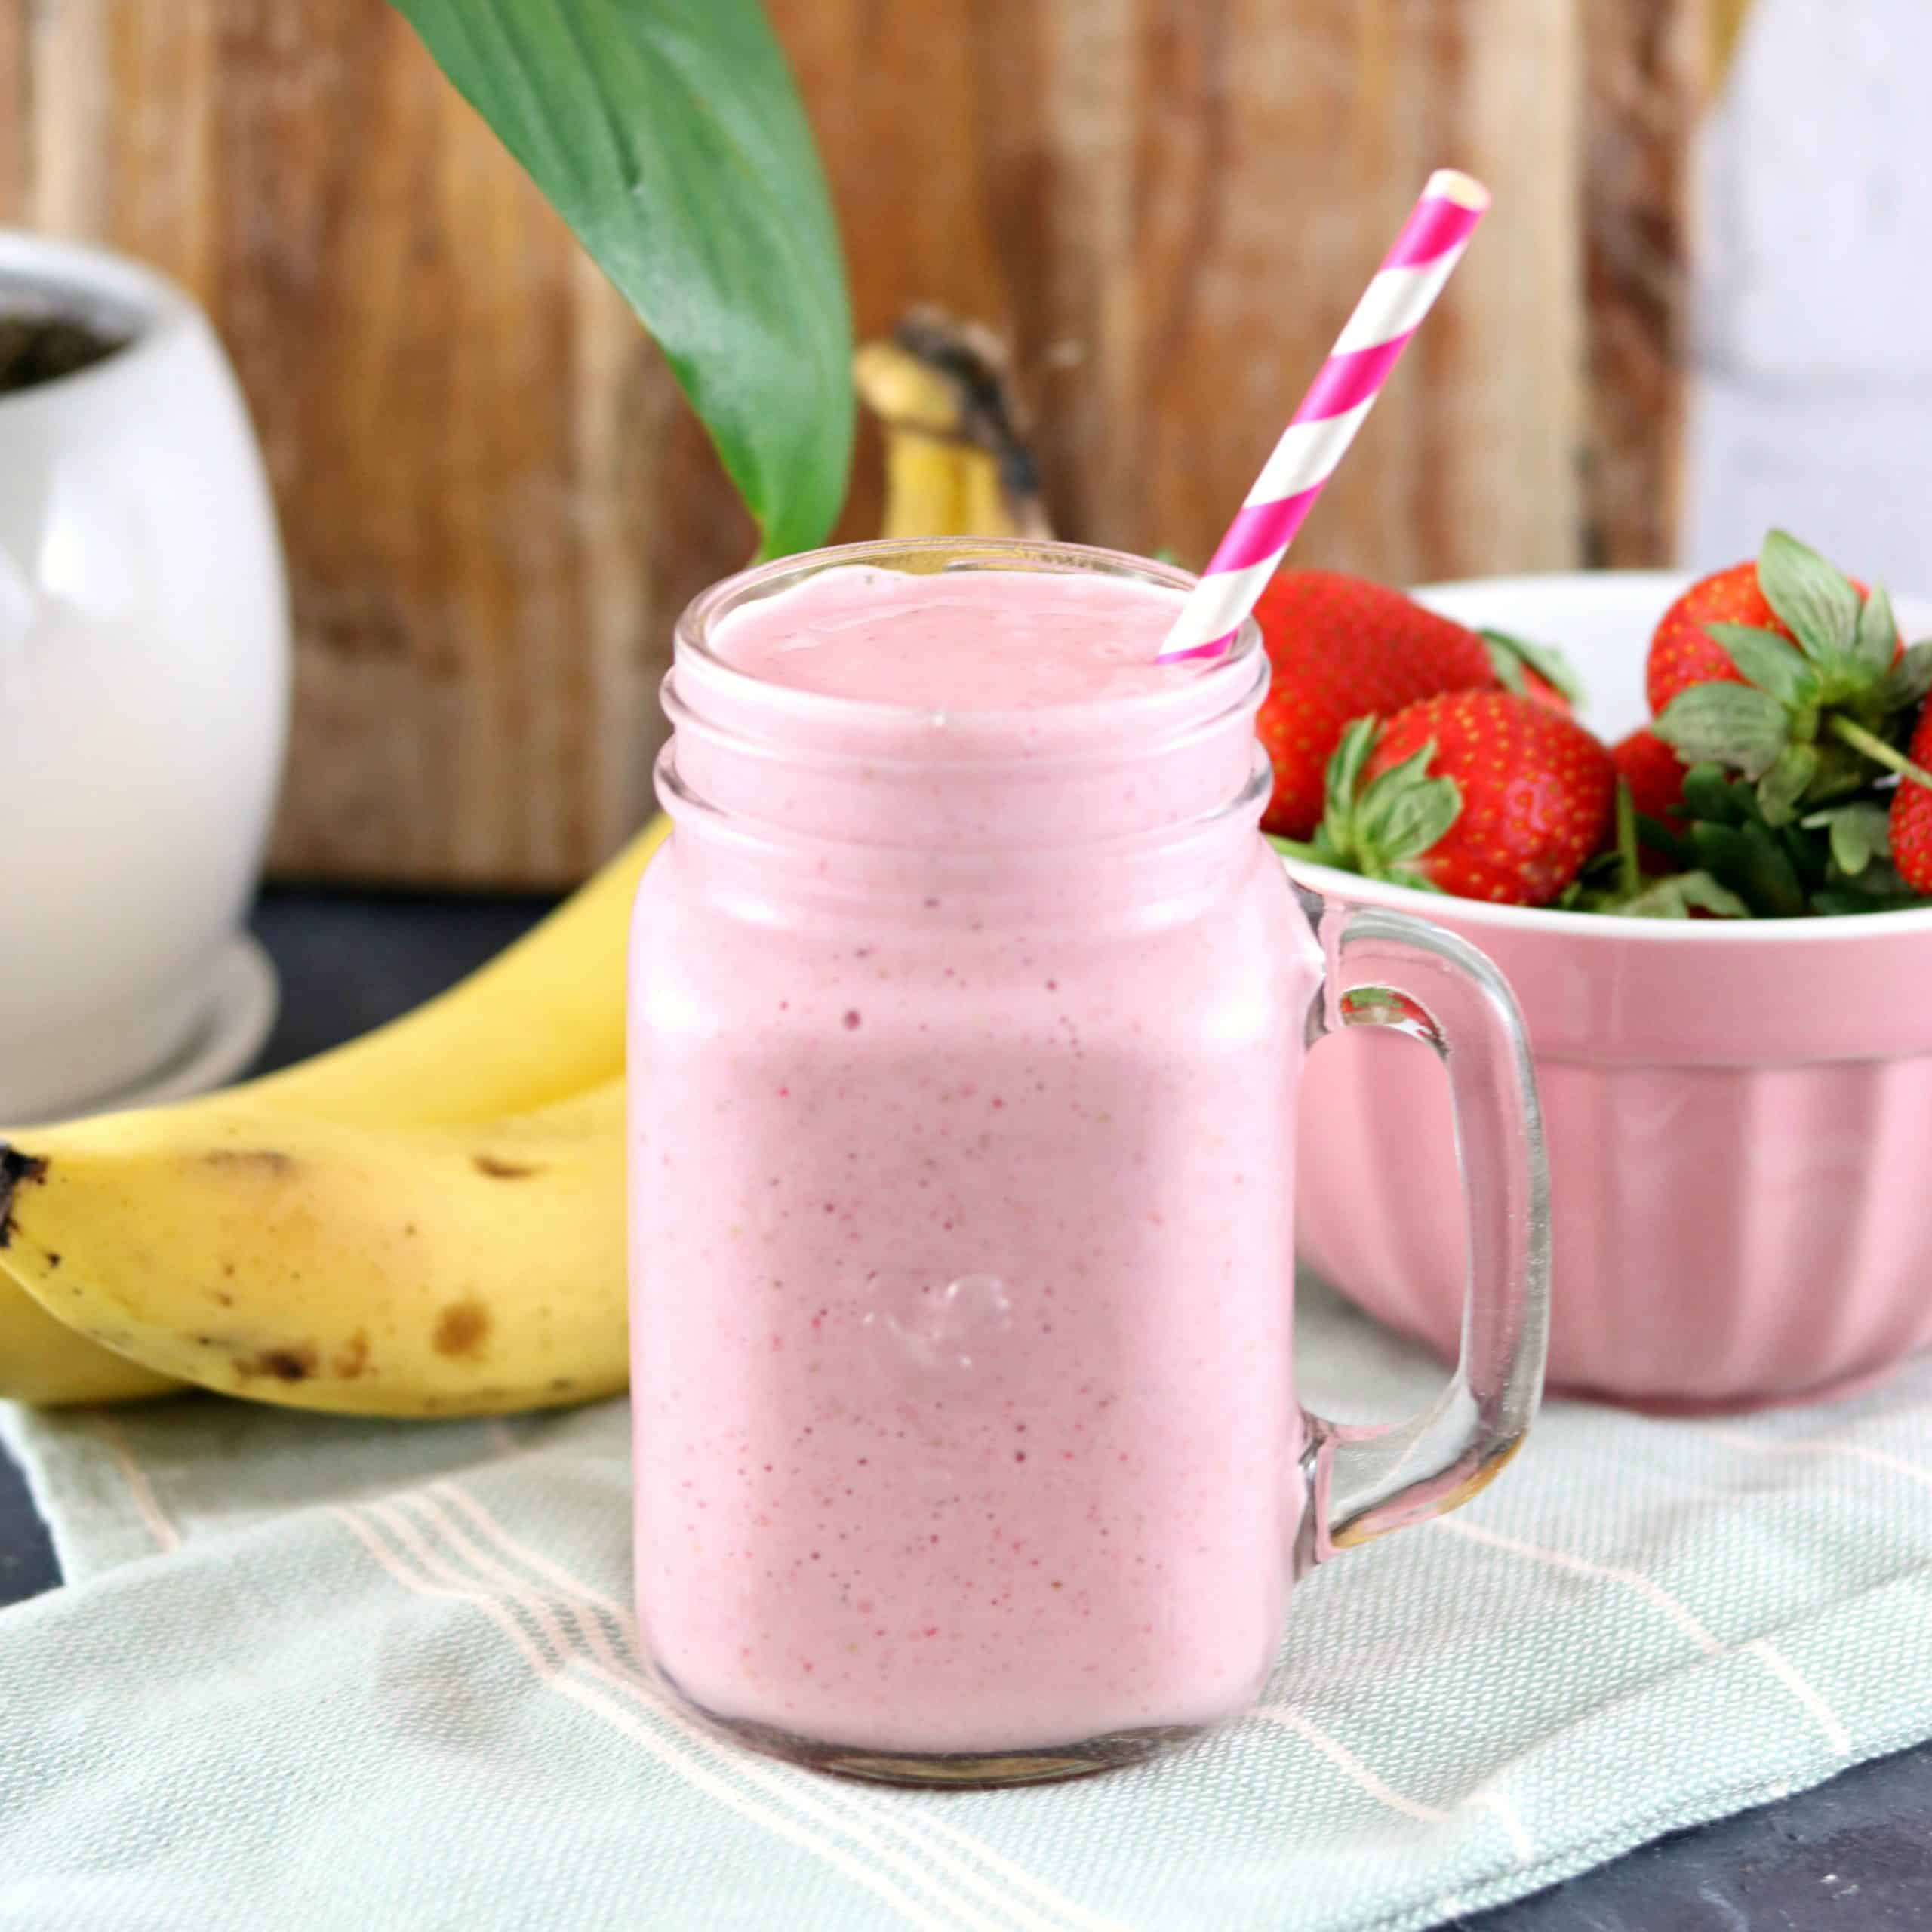 Southern In Law: Recipe: Creamy Strawberry Banana Smoothie